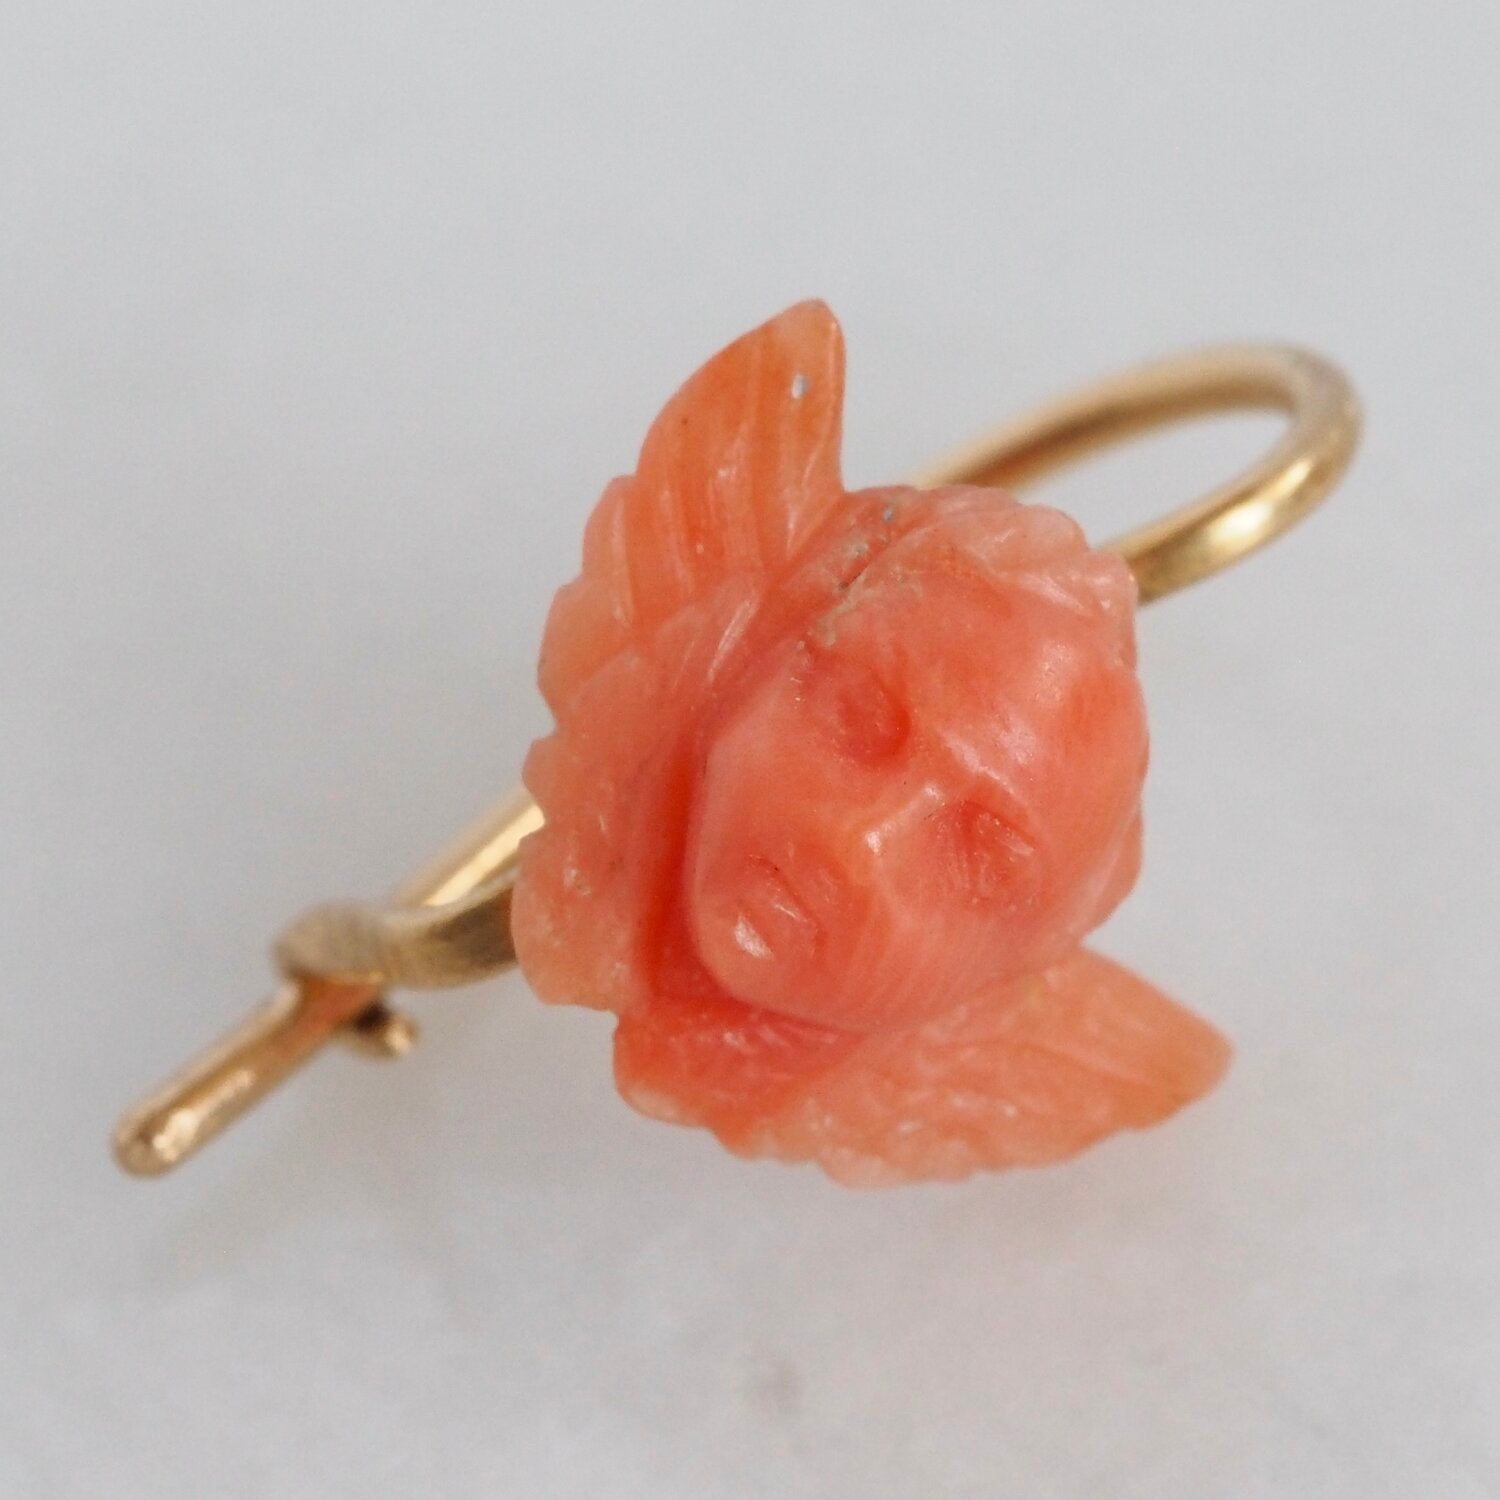 Antique Victorian Portuguese 19k Gold Carved Coral Cherub Earrings